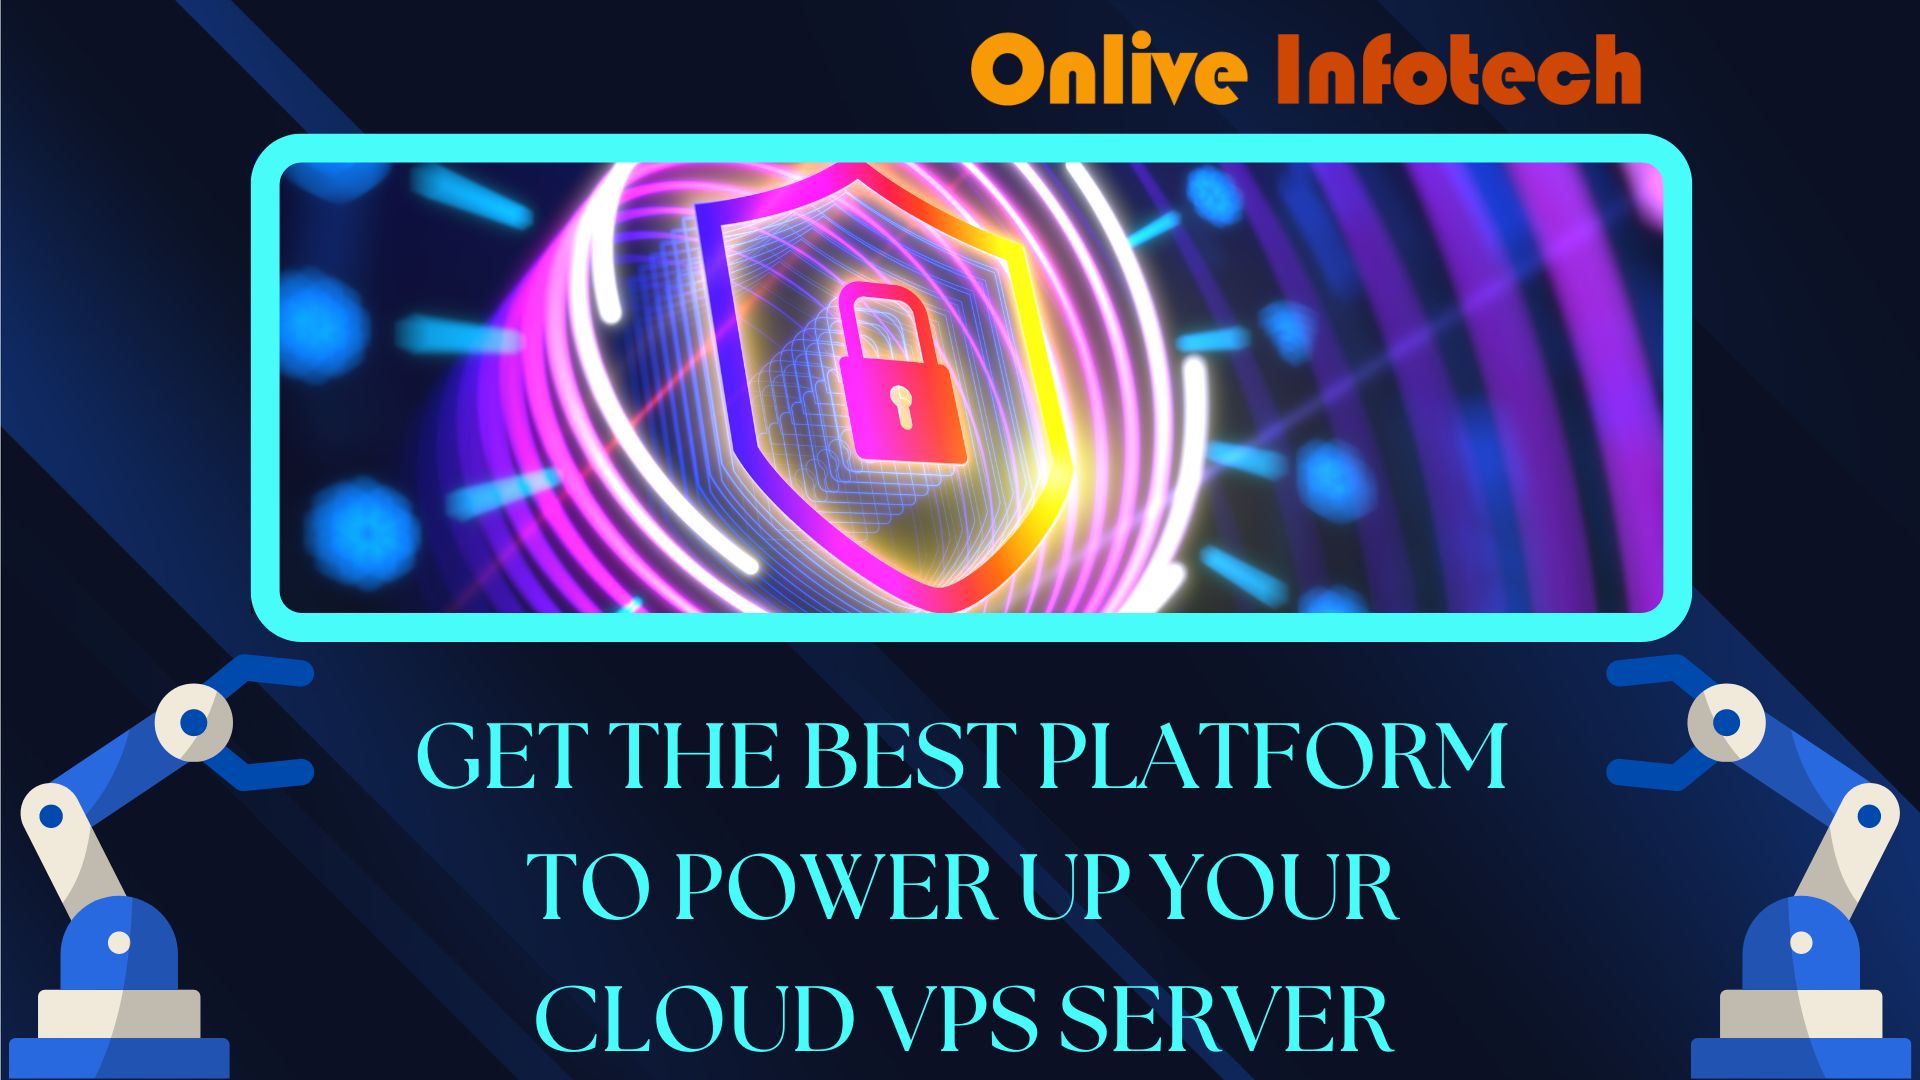 Get The Best Platform to Power Up Your Cloud VPS Server